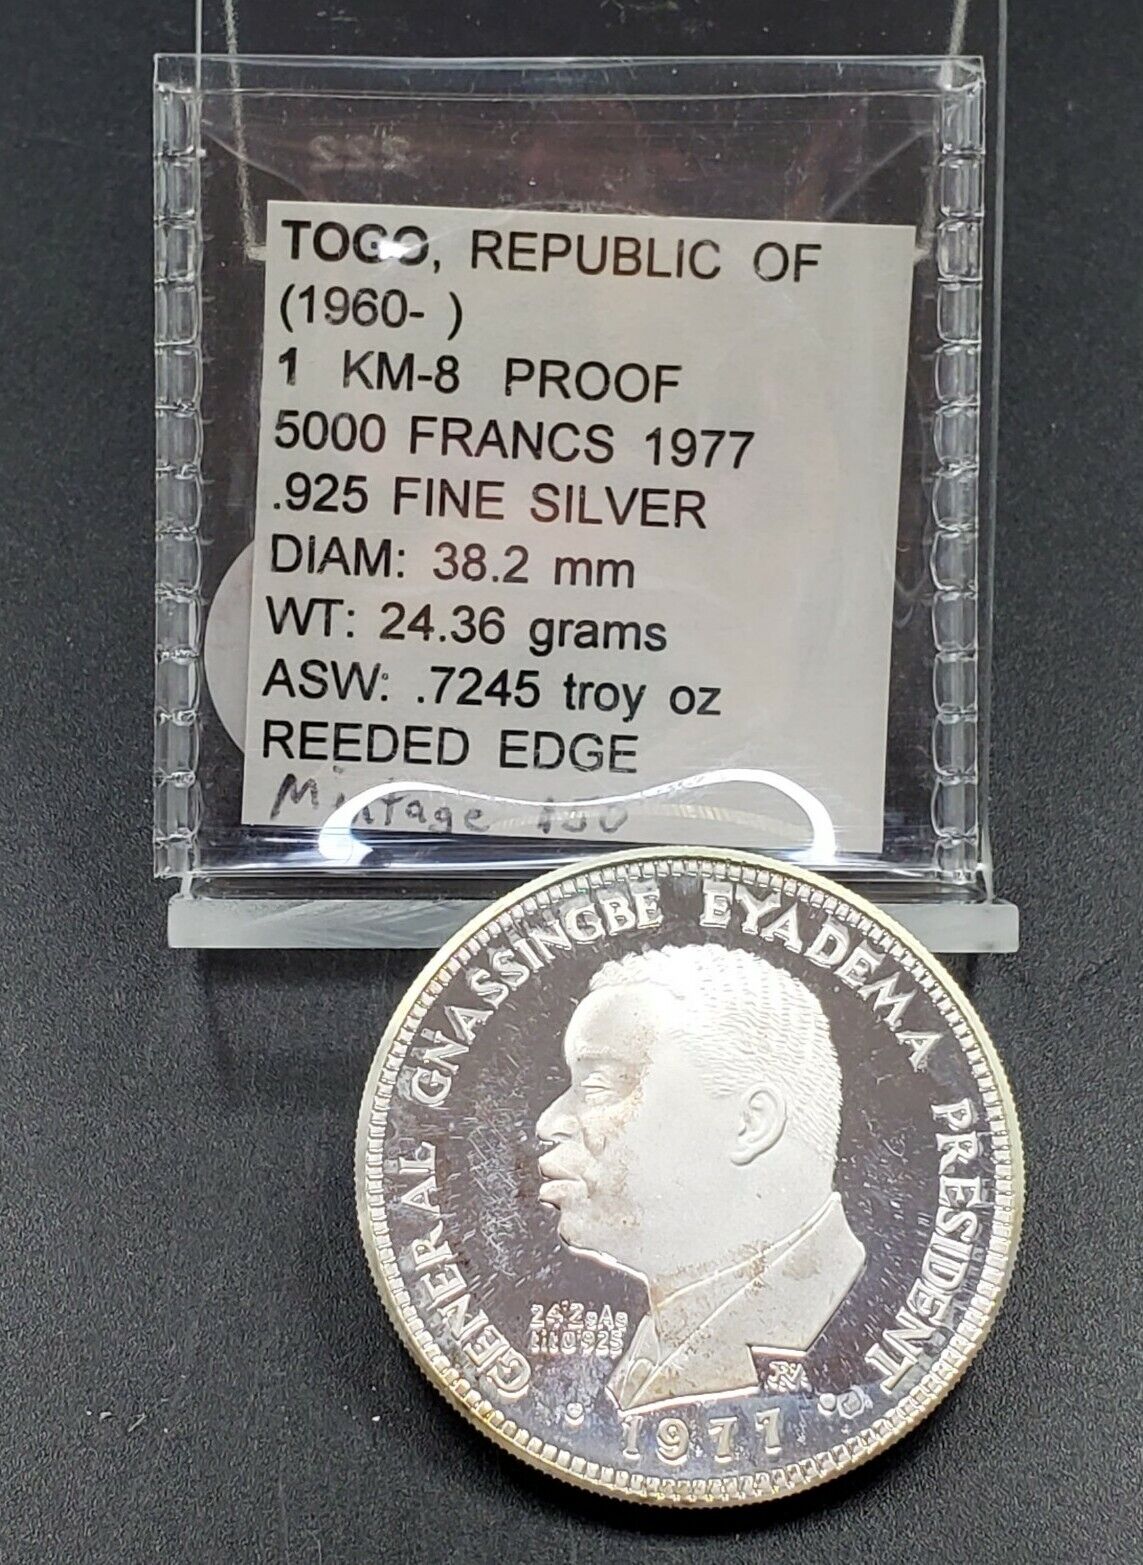 1977 TOGO Republic 5000 FRANCS Choice / Gem SILVER Proof MINTAGE 150 VERY LOW